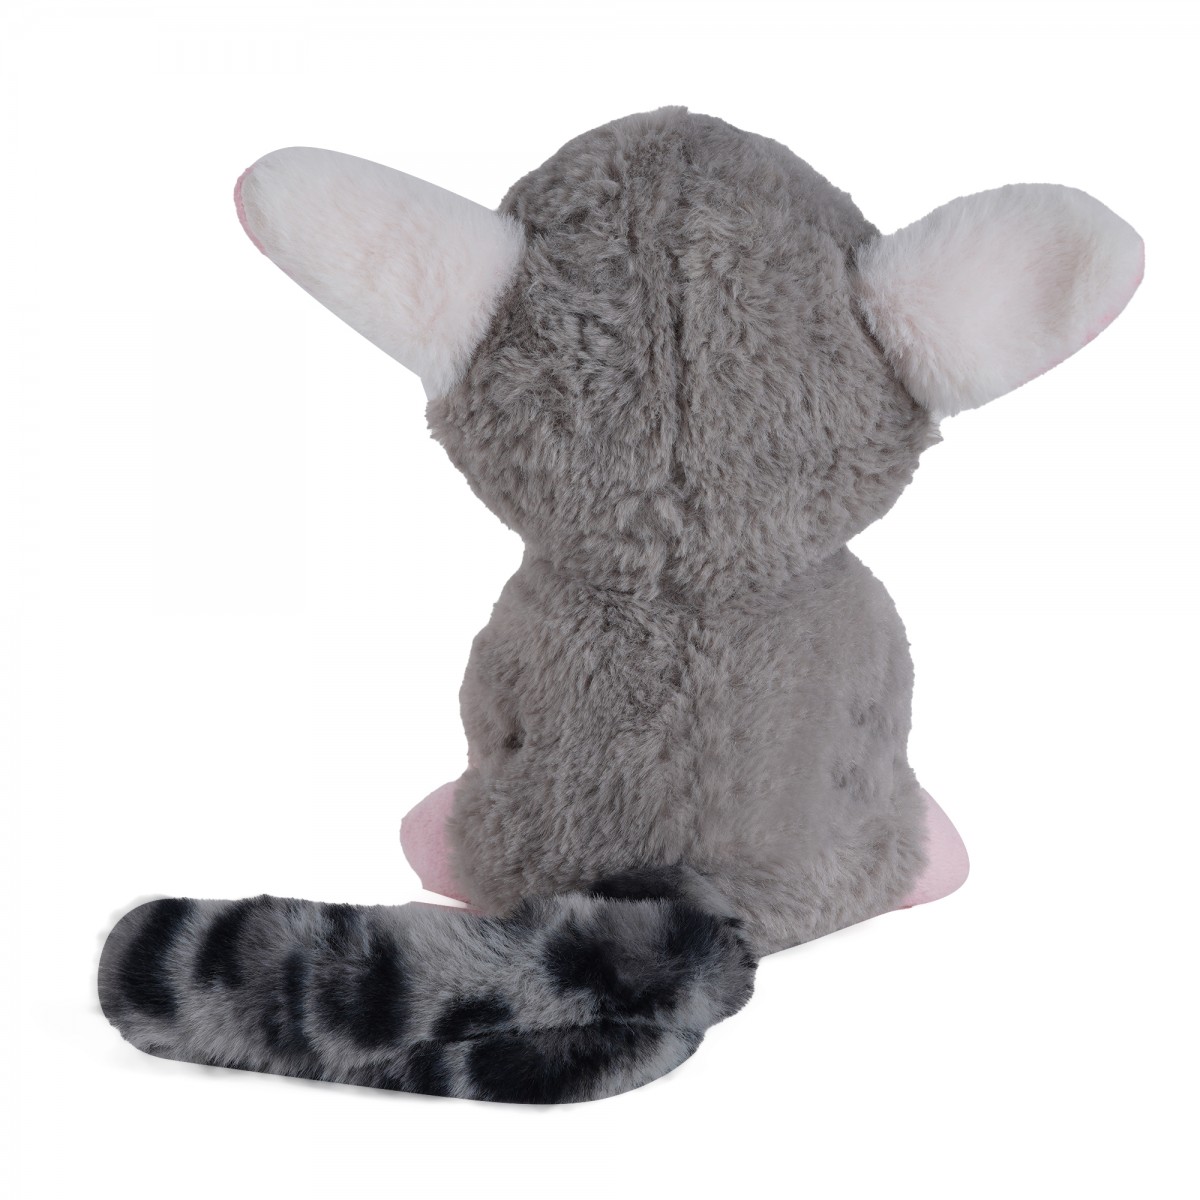 Huggable Cuddly Stuffed Toy By Fuzzbuzz, Soft Toys for Kids, Cute Plushies Grey, For Kids Of Age 2 Years & Above